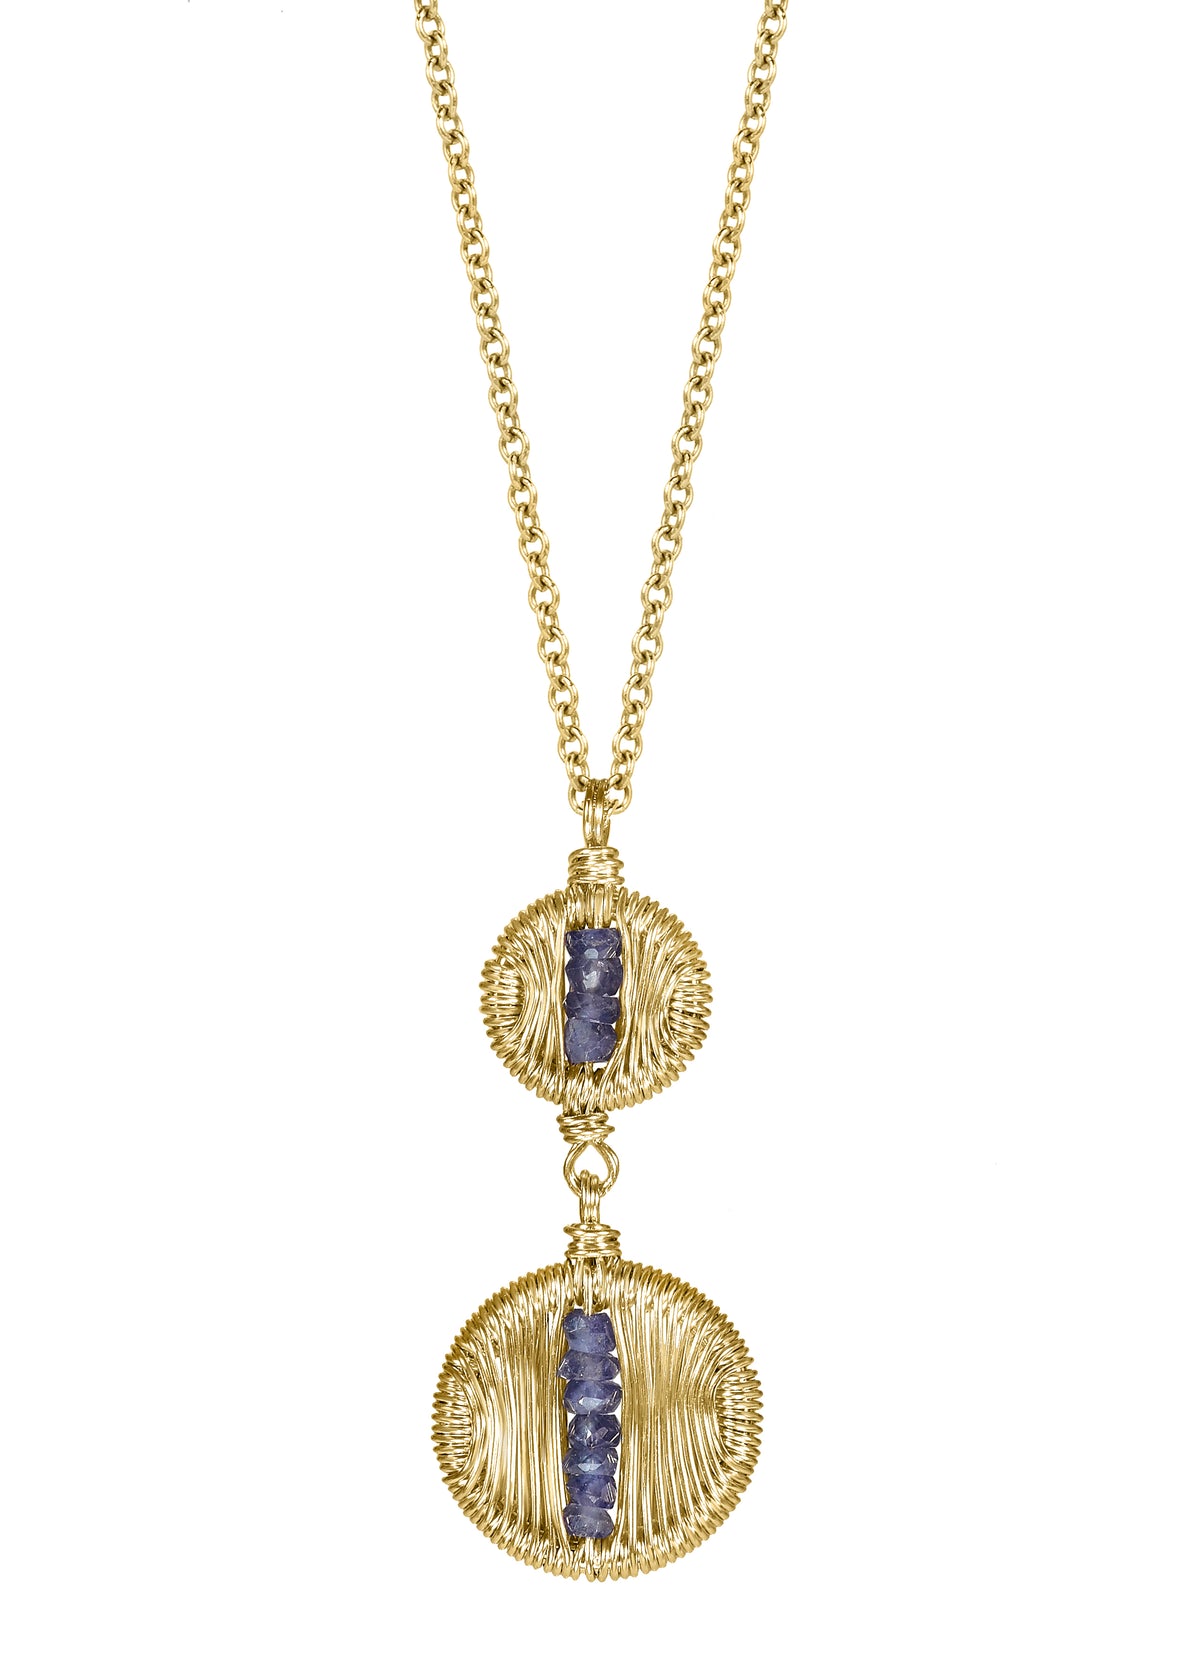 Blue sapphire 14k gold fill Necklace measures 17&quot; in length Pendants measure 1/4&quot; D (top) and 3/8&quot; D (bottom) Handmade in our Los Angeles studio